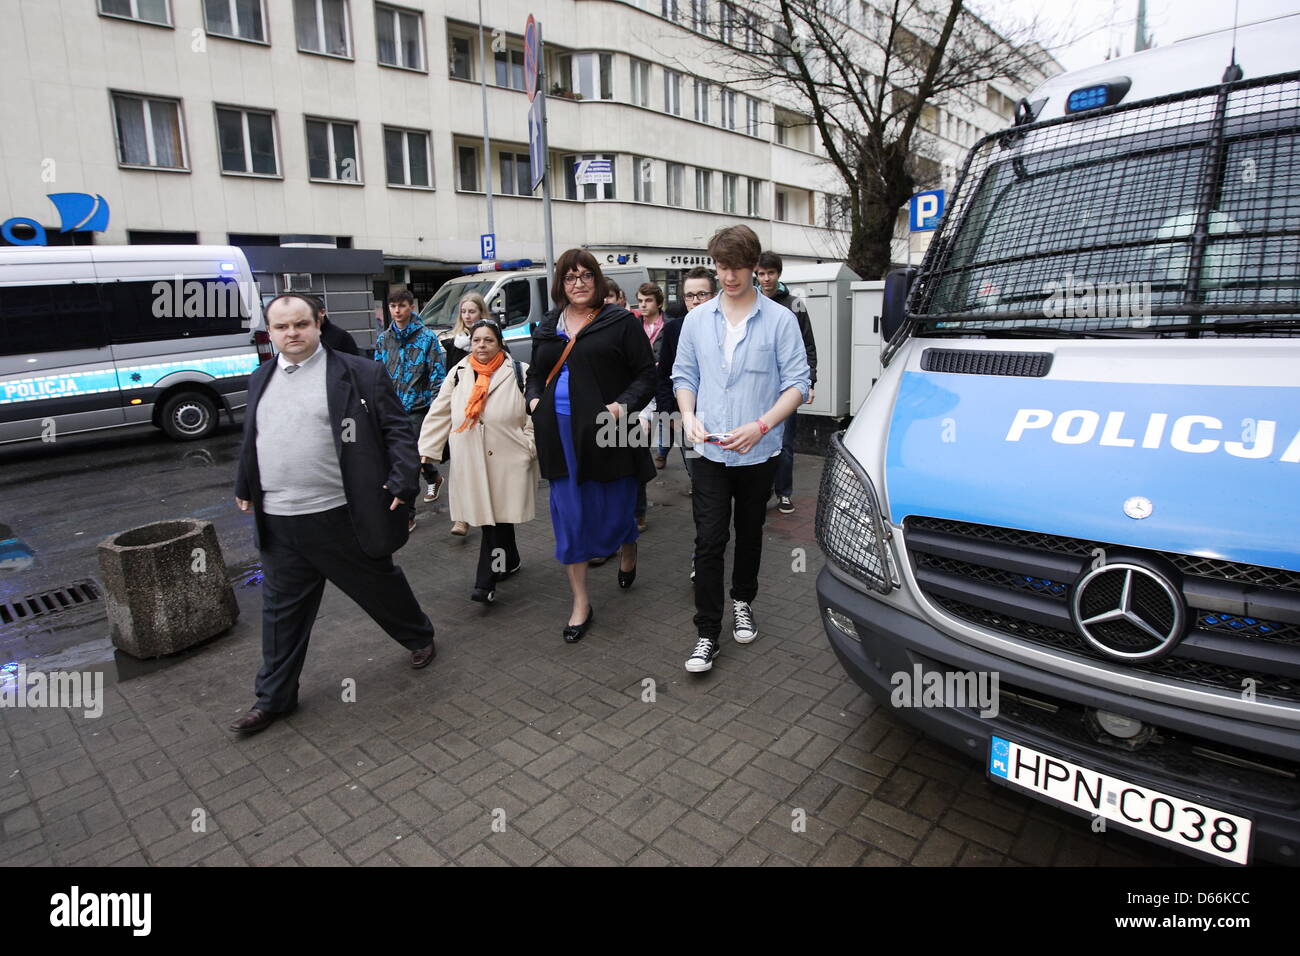 Gdynia, Poland 13th, April 2013 First Polish transgender Parliament member attacekd before the Pomeranian Women Congress in Gdynia by the Arka Gdynia football fans and nacionalists. Police intervenied , one person was arrested, nobody was hurt. Pictured - Anna Grodzka goes to the meeting in the Police assistCredit: Michal Fludra/Alamy Live News Stock Photo